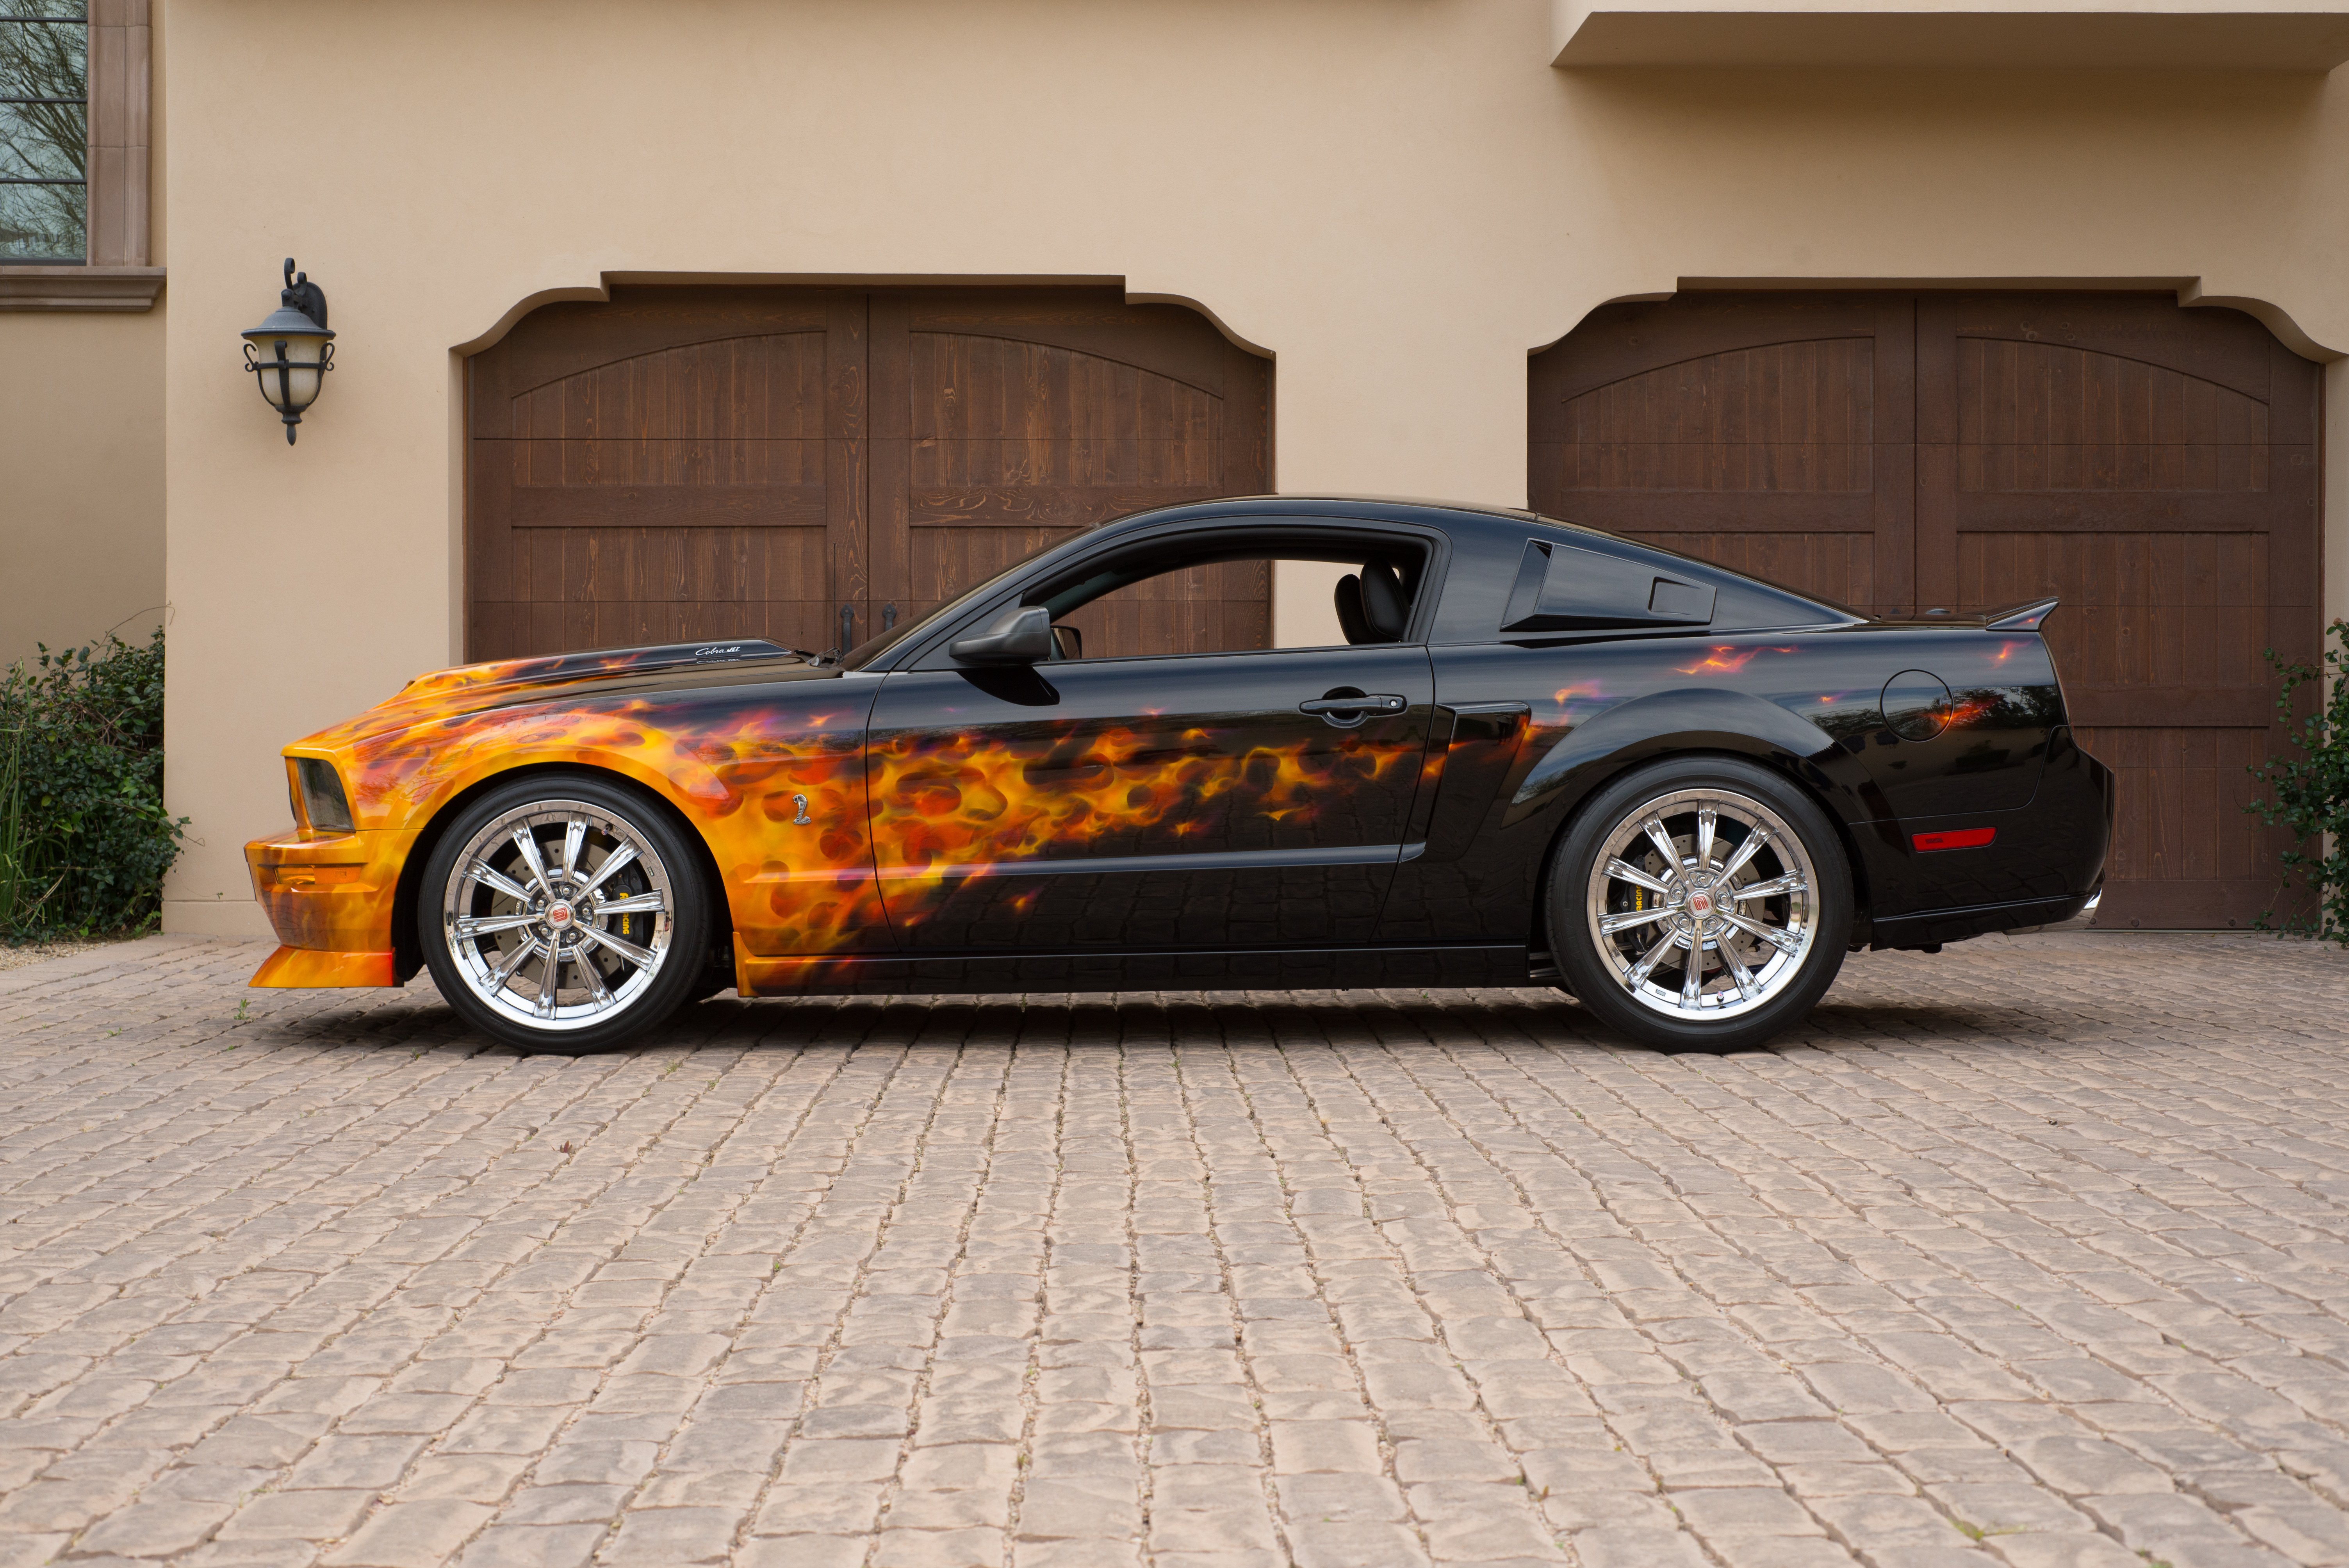 2007, Ford, Mustang, Gt, Pro, Touring, Super, Street, Rodder, Rod, Muscle, Usa, 6016x4016 01 03 Wallpaper